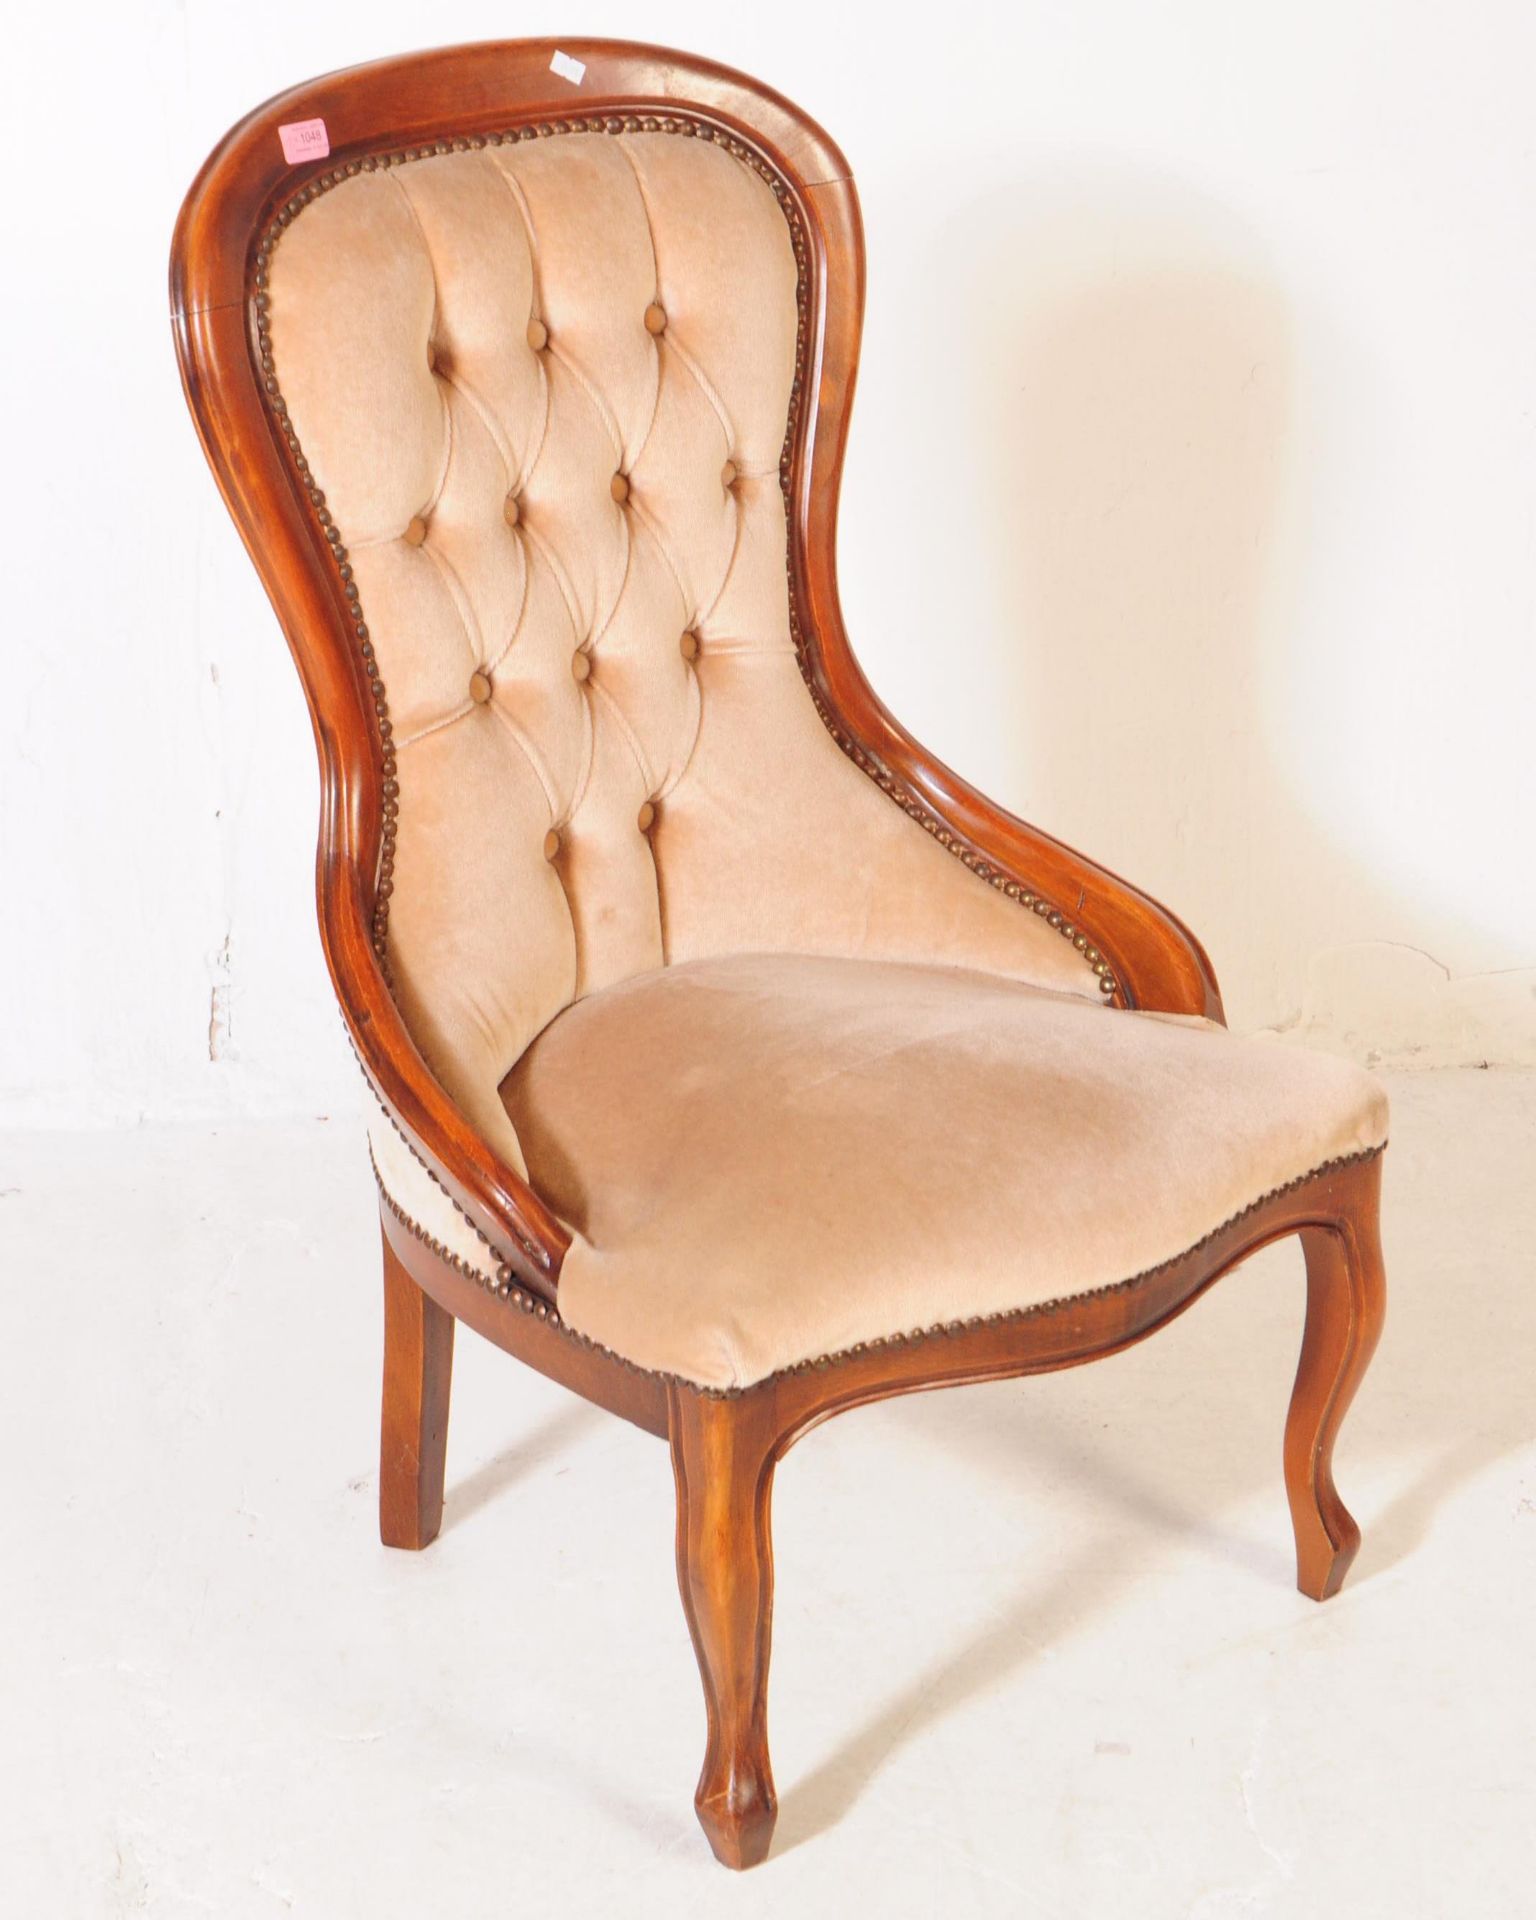 VICTORIAN REVIVAL HIGH BACK LOUNGE ARMCHAIR - Image 5 of 8